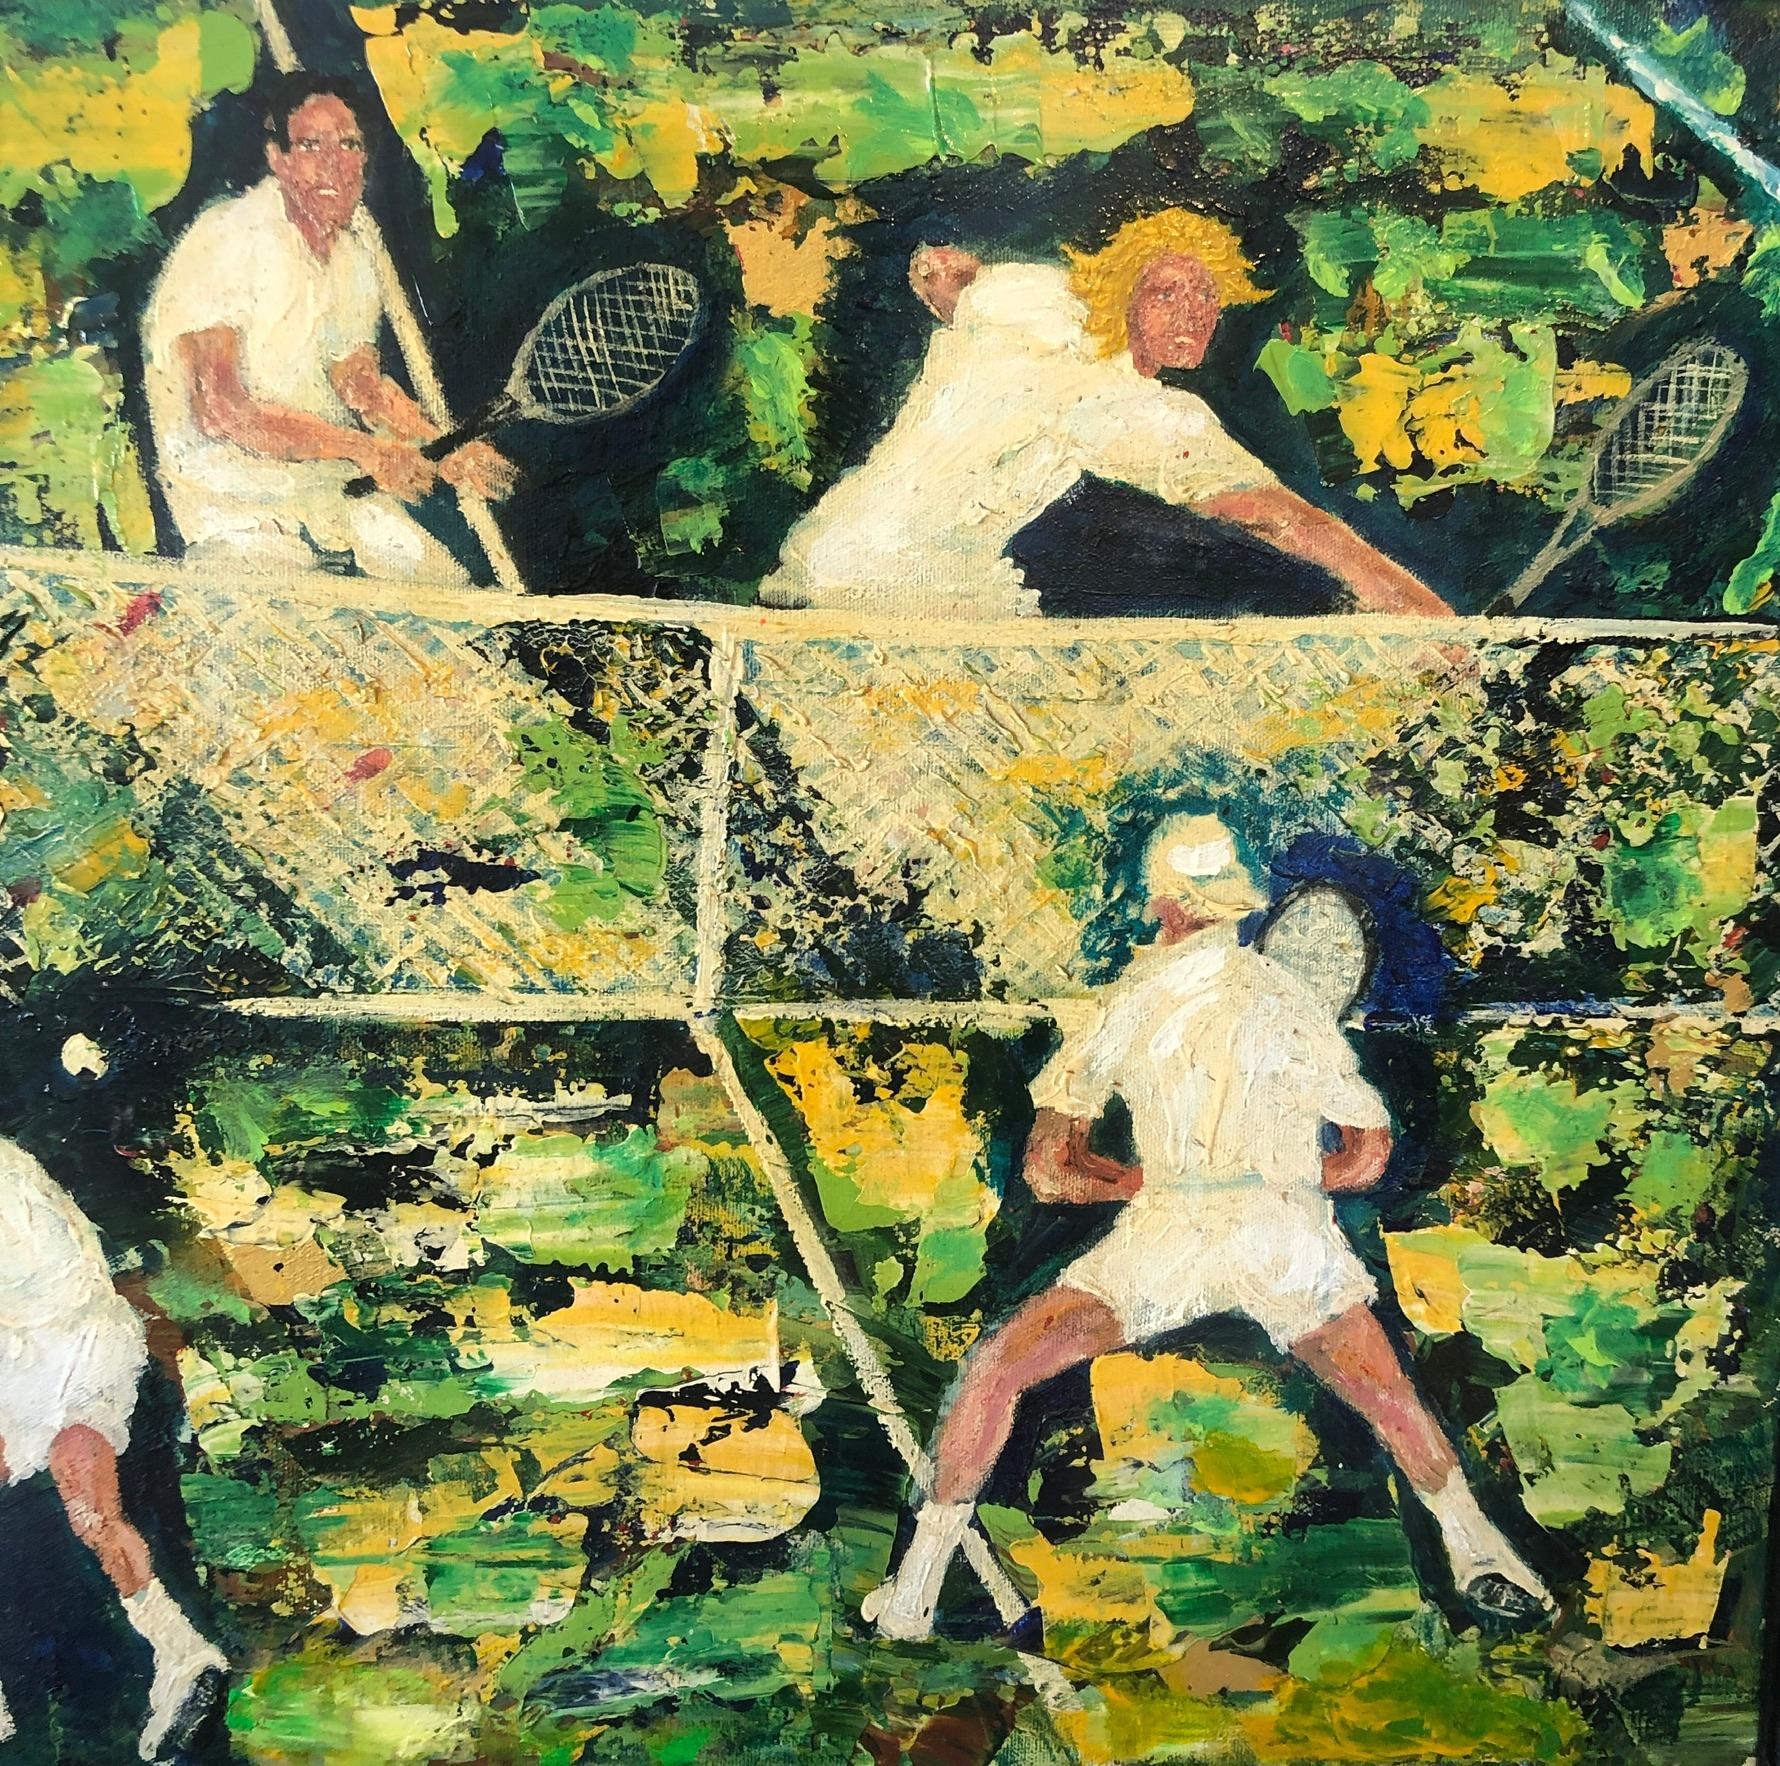 1960's Oil Painting Tennis Match Sports Scene After Leroy Neiman Sporting Art - Black Figurative Painting by Paolo Corvino